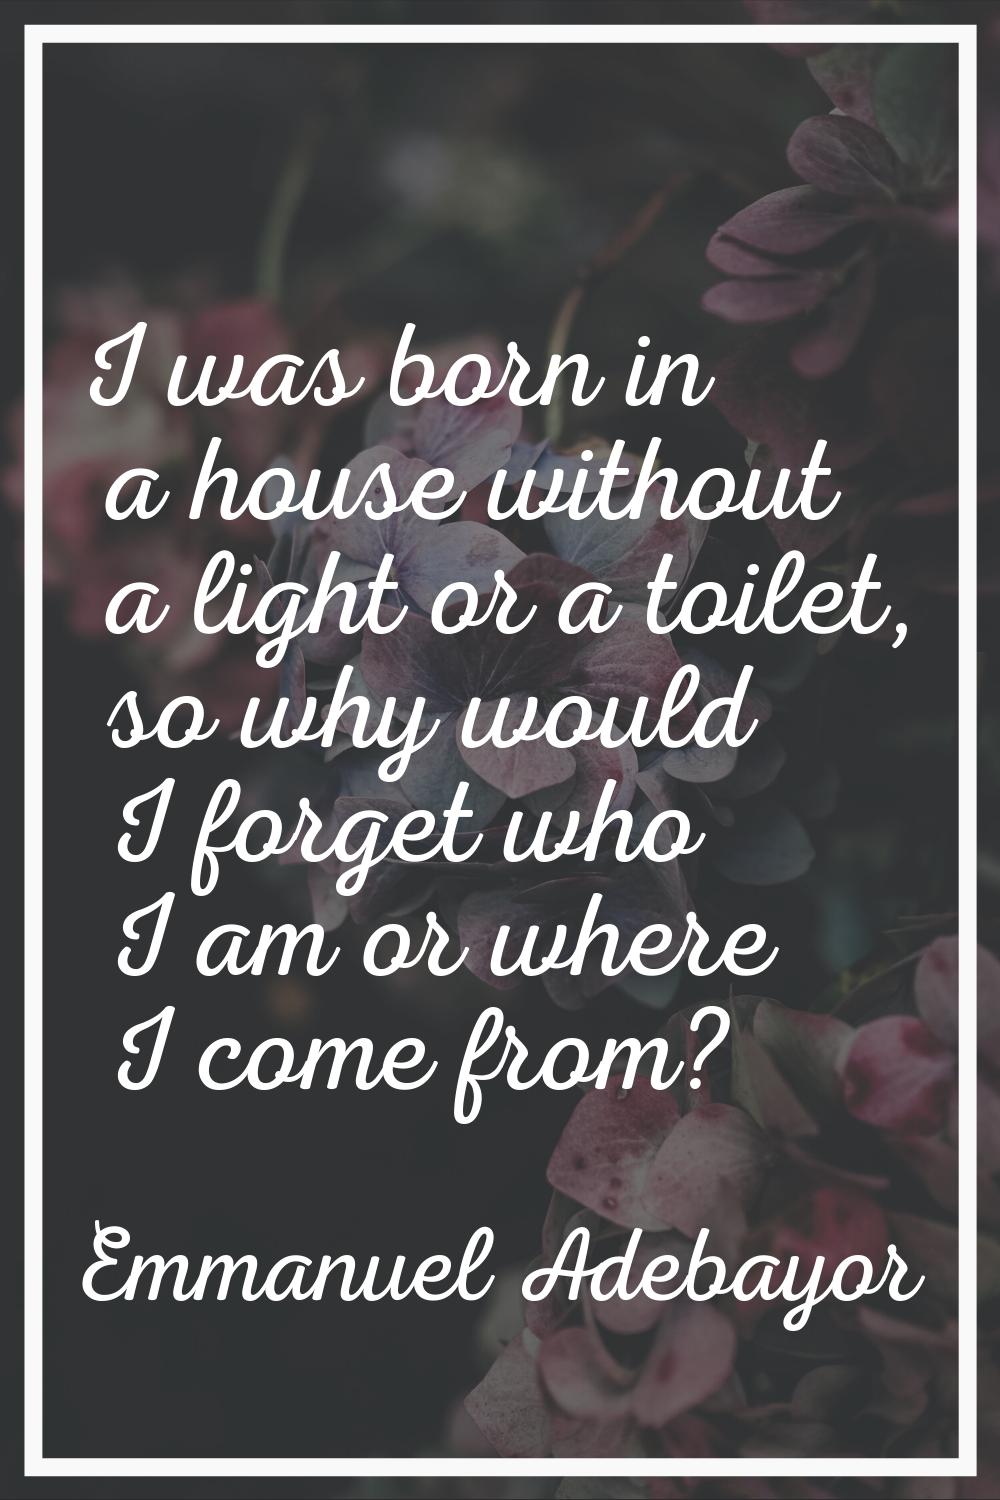 I was born in a house without a light or a toilet, so why would I forget who I am or where I come f